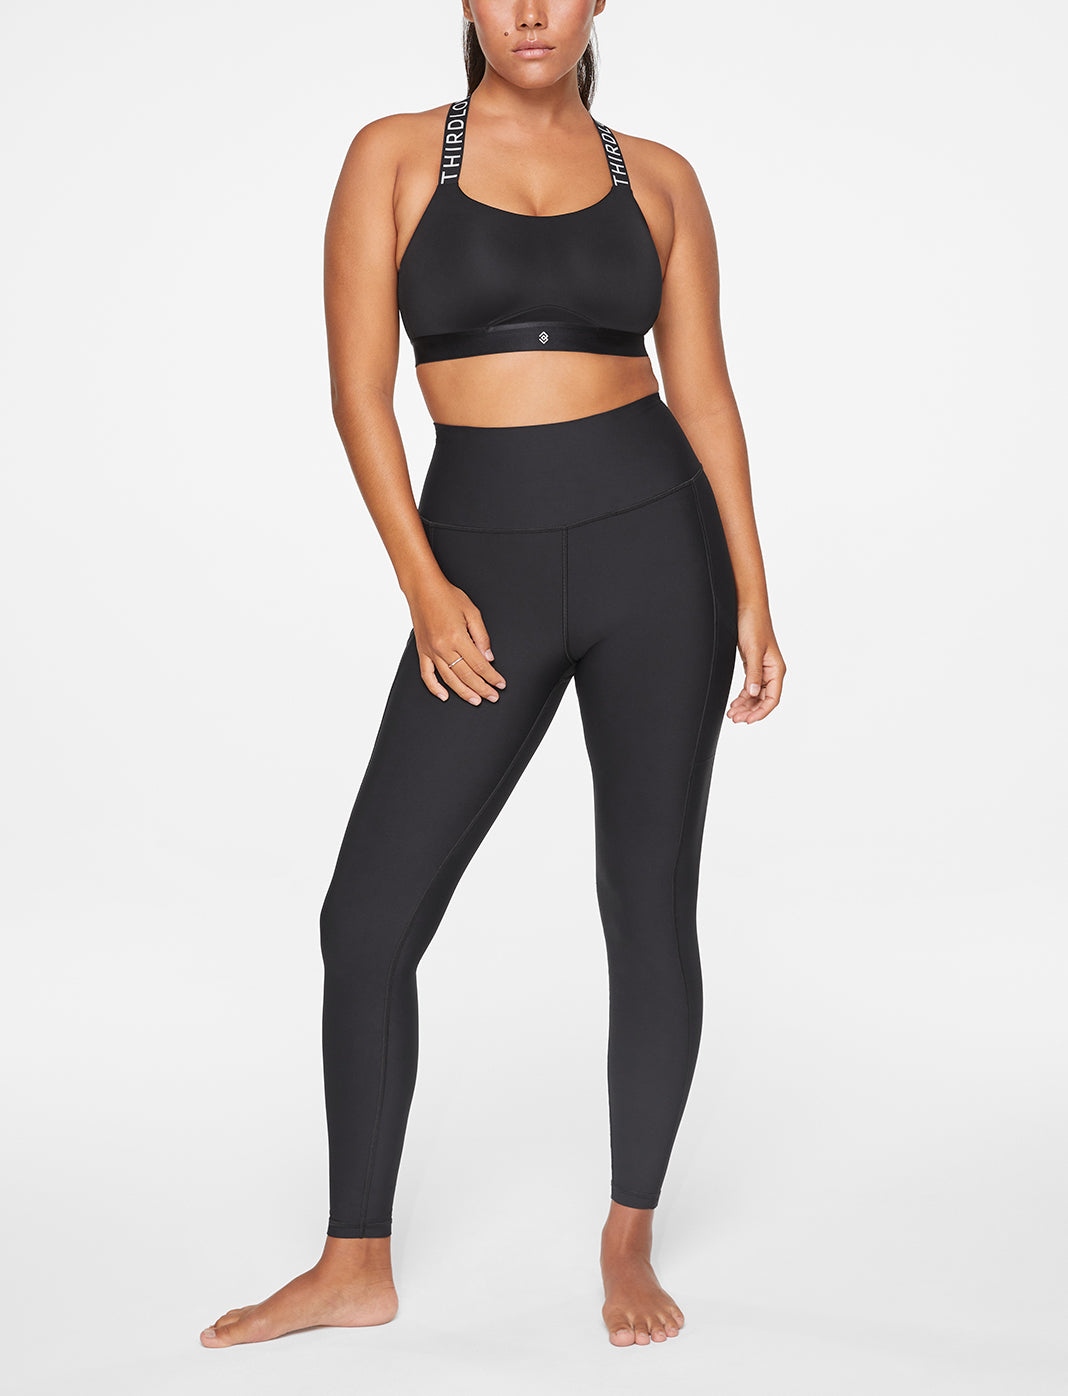 8 Best Leggings in 2023 for Working Out and Lounging